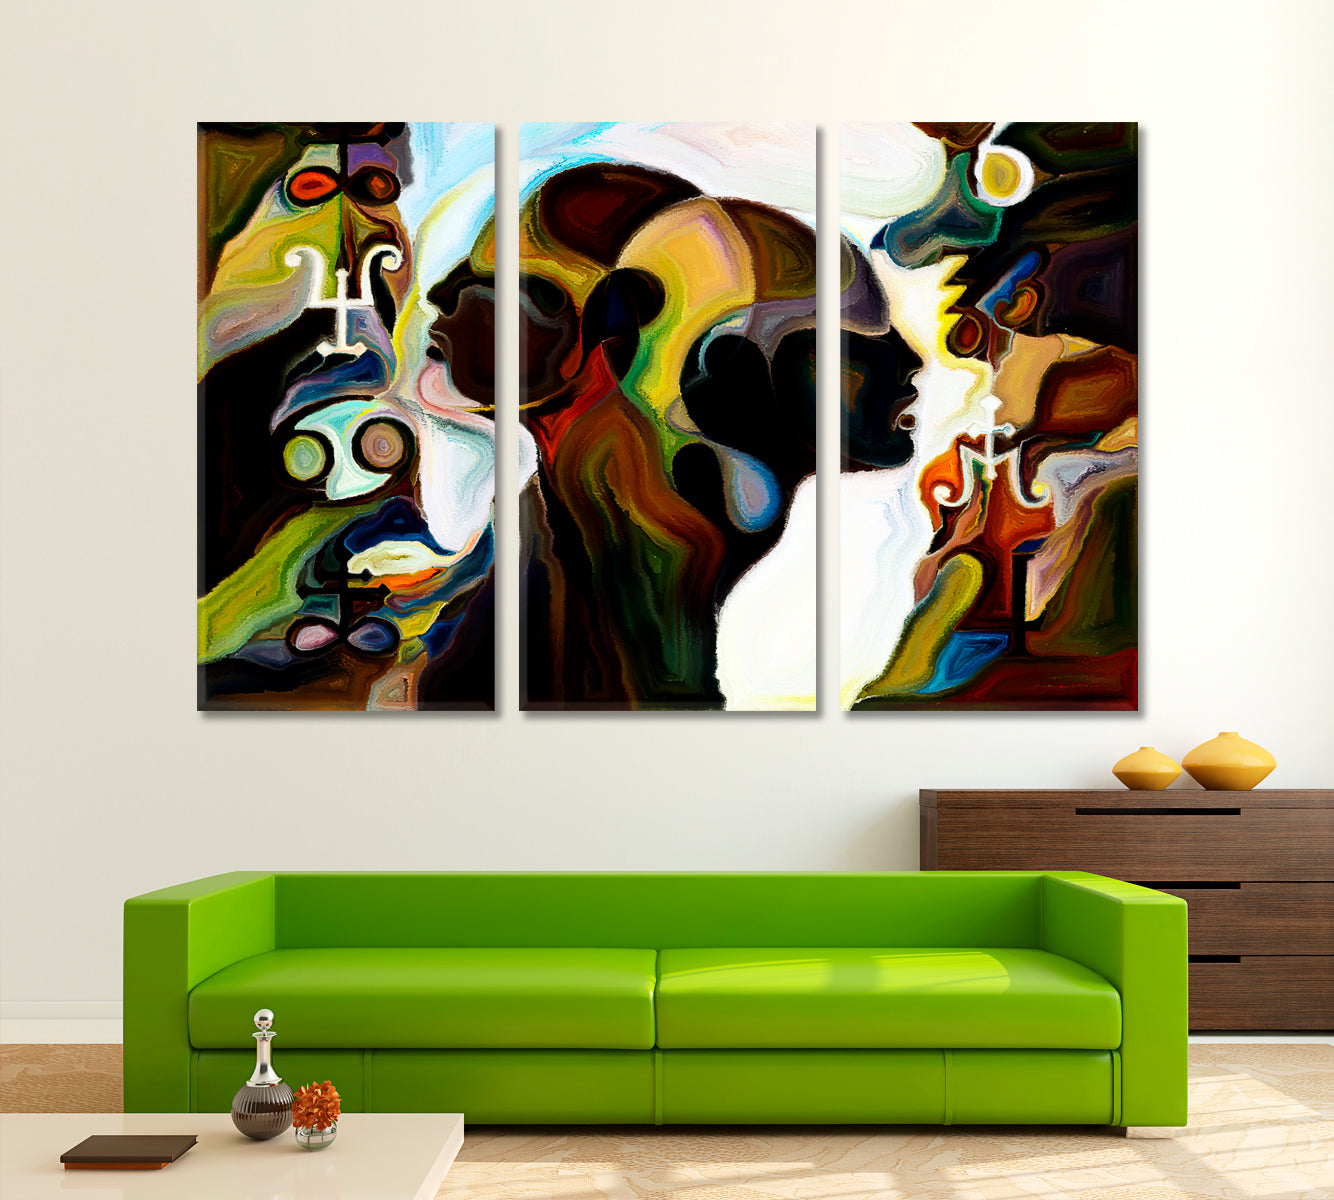 Infinite Forms of Creation Consciousness Art Artesty 3 panels 36" x 24" 